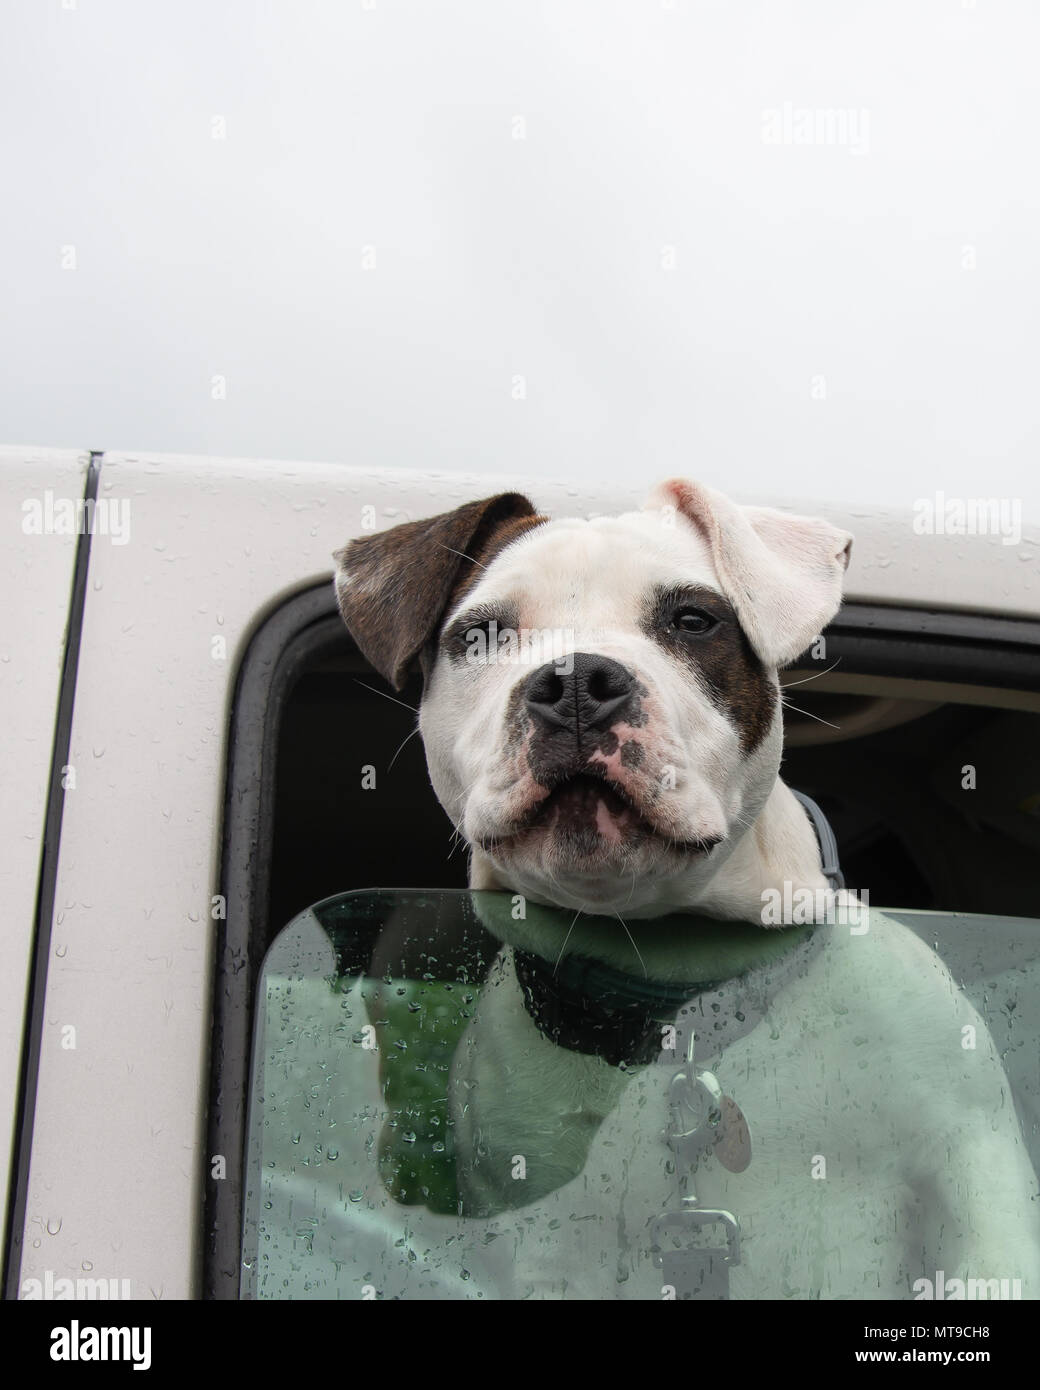 An aggressive American Pit Bull Terrier leaning out of the window of a pickup truck in a parking lot Stock Photo